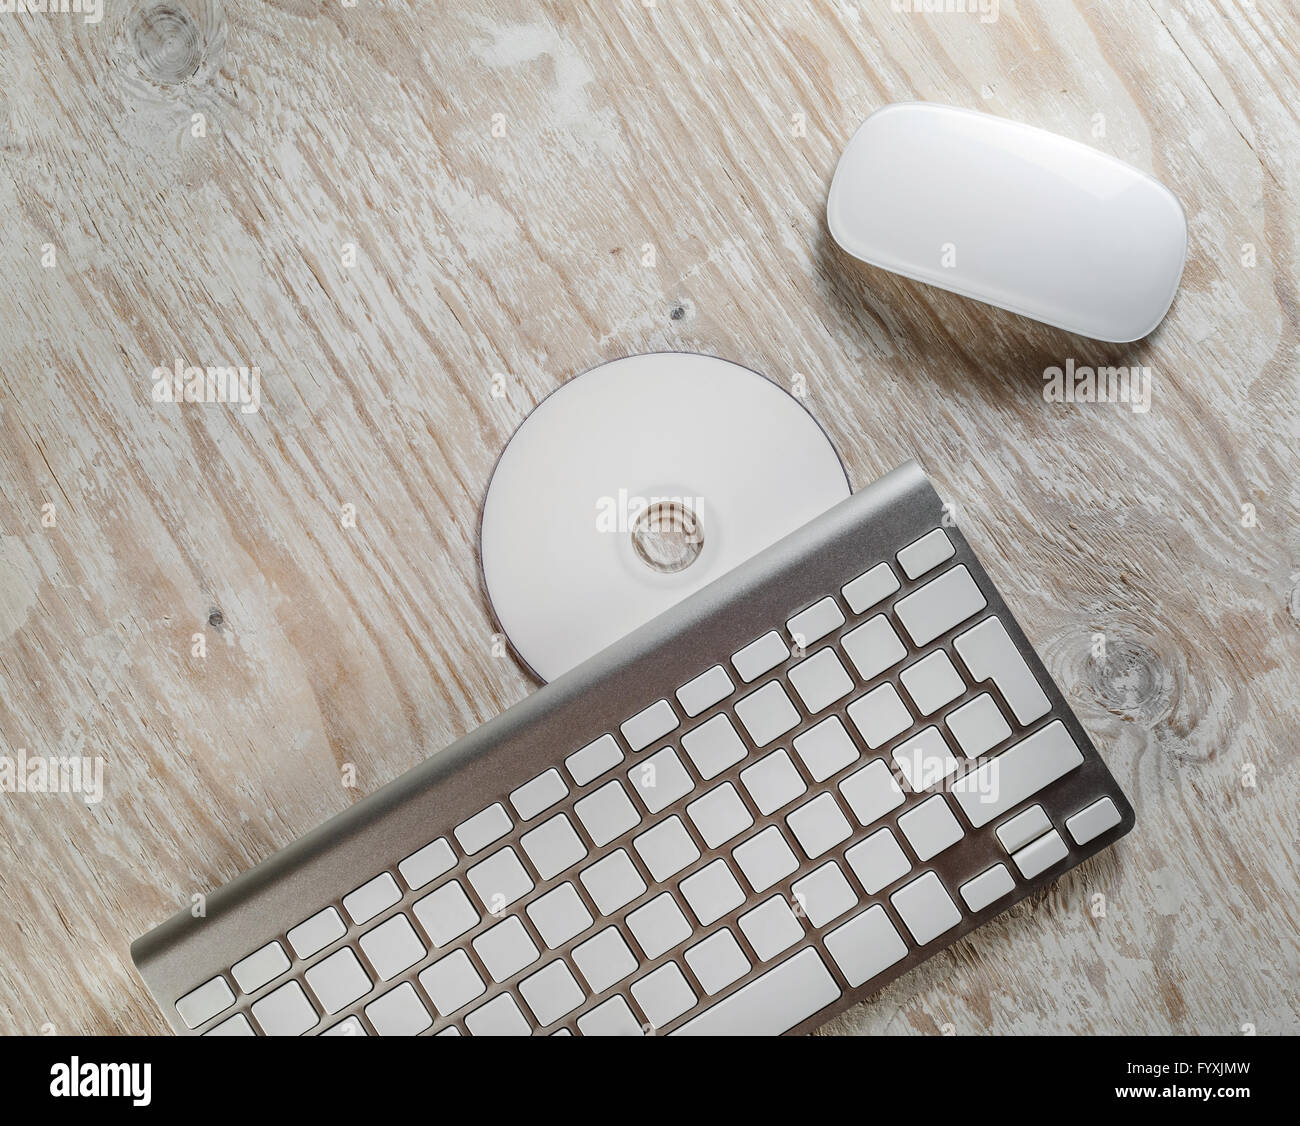 Mouse, keyboard and CD Stock Photo